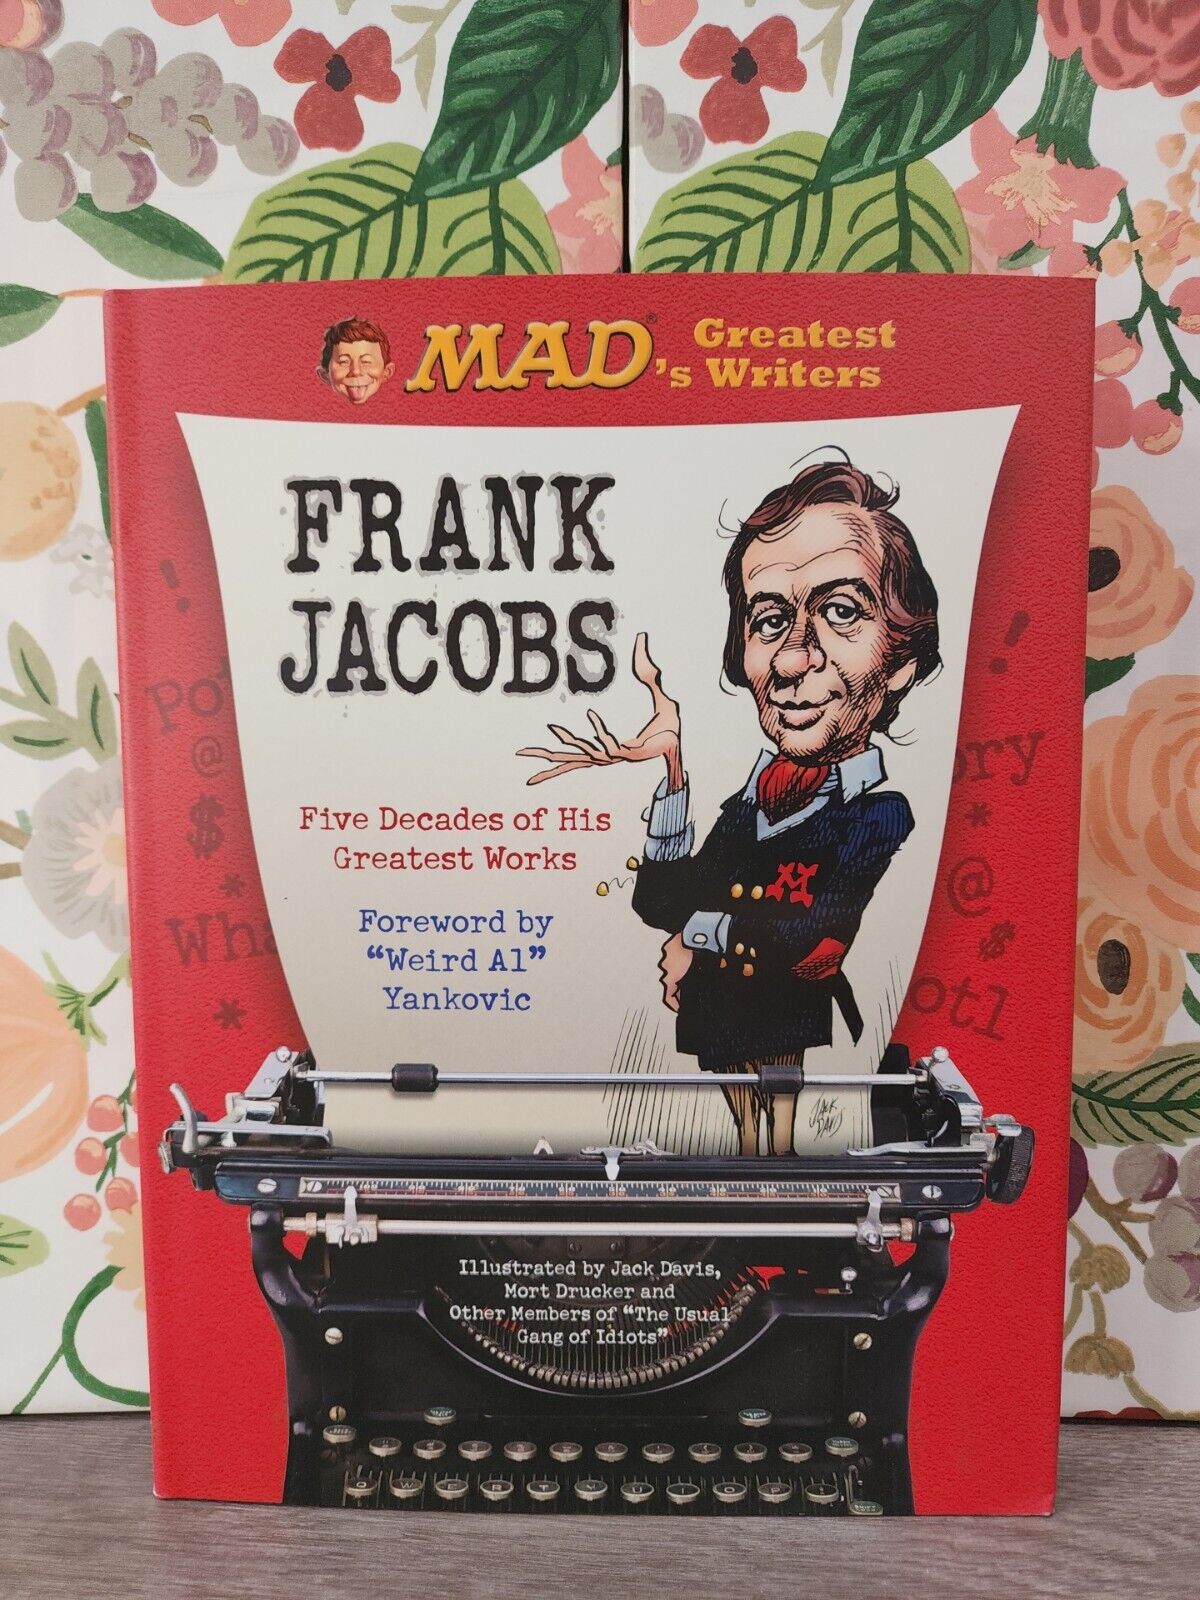 MAD's Greatest Writers Frank Jacobs: Five Decades of His Greatest Works